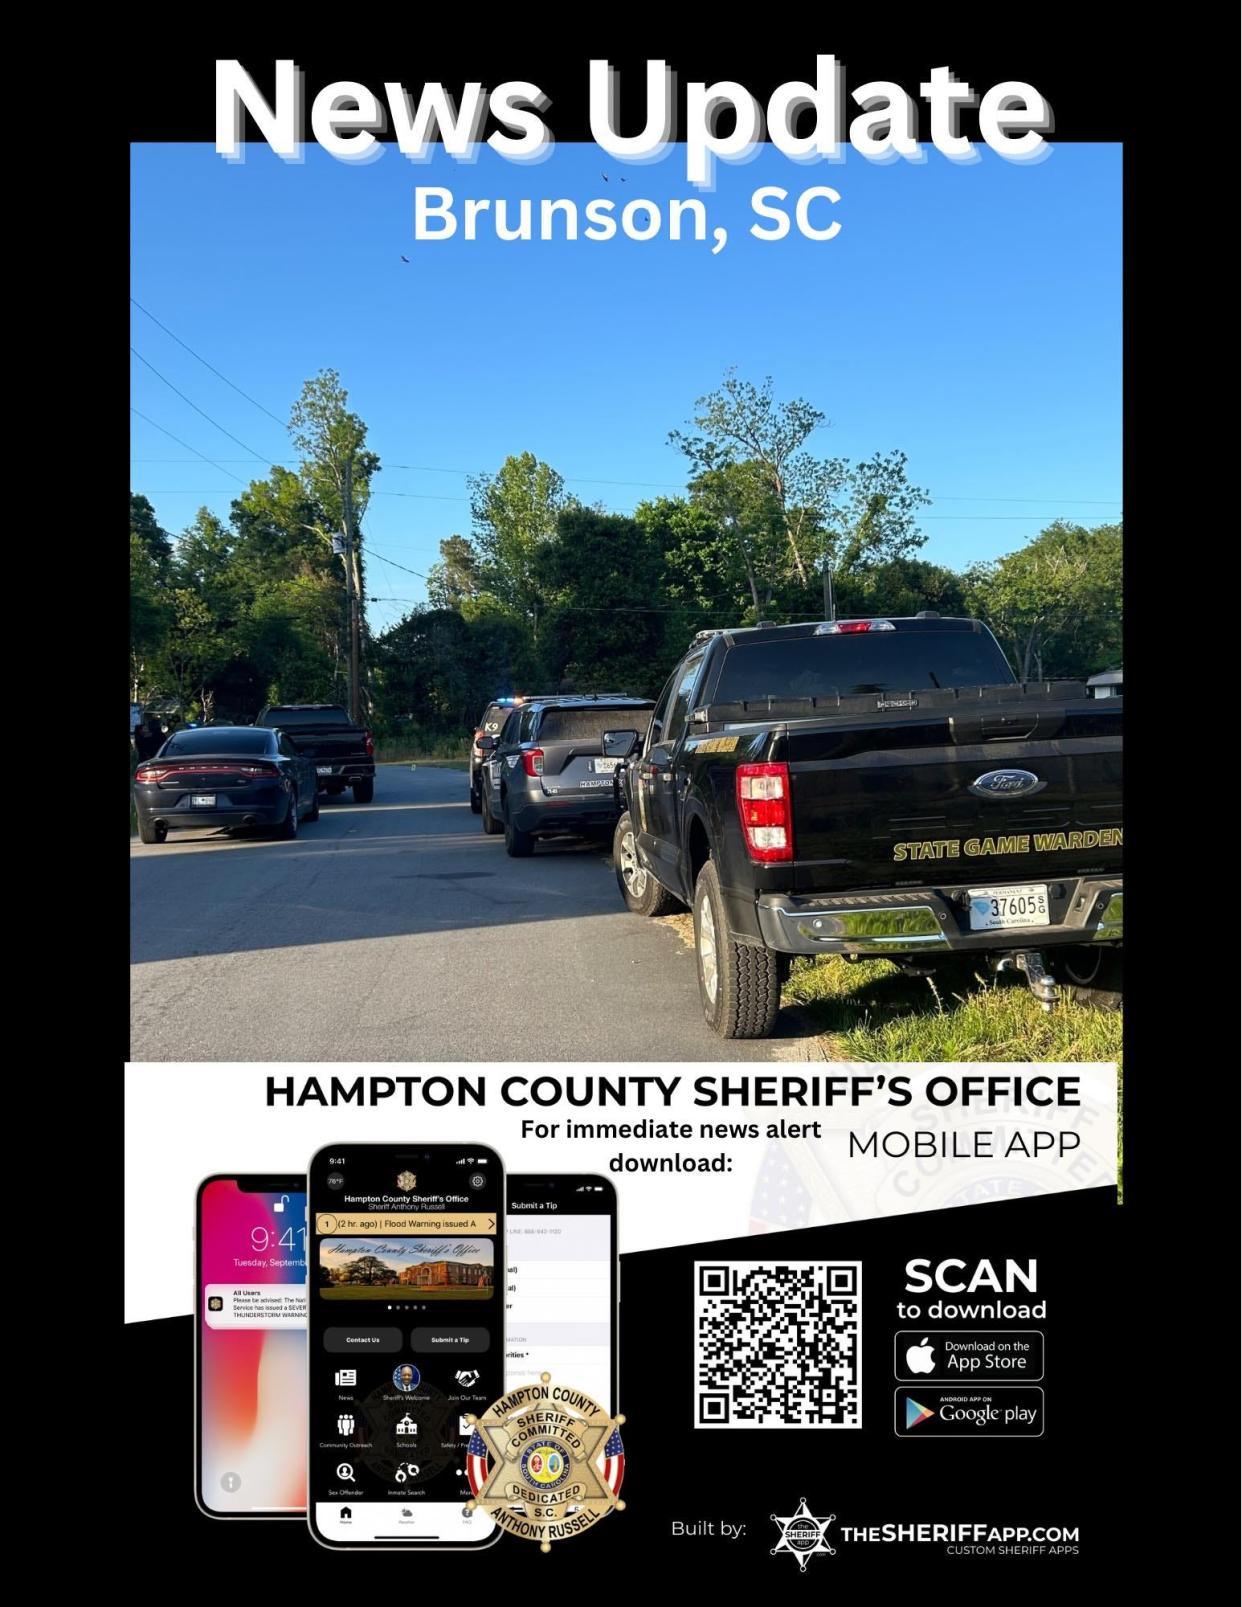 The HCSO encouraged the public to go to the preferred app store, search for "Hampton County Sheriff SC," and download the app for immediate news alerts, information and more in the Hampton County area.